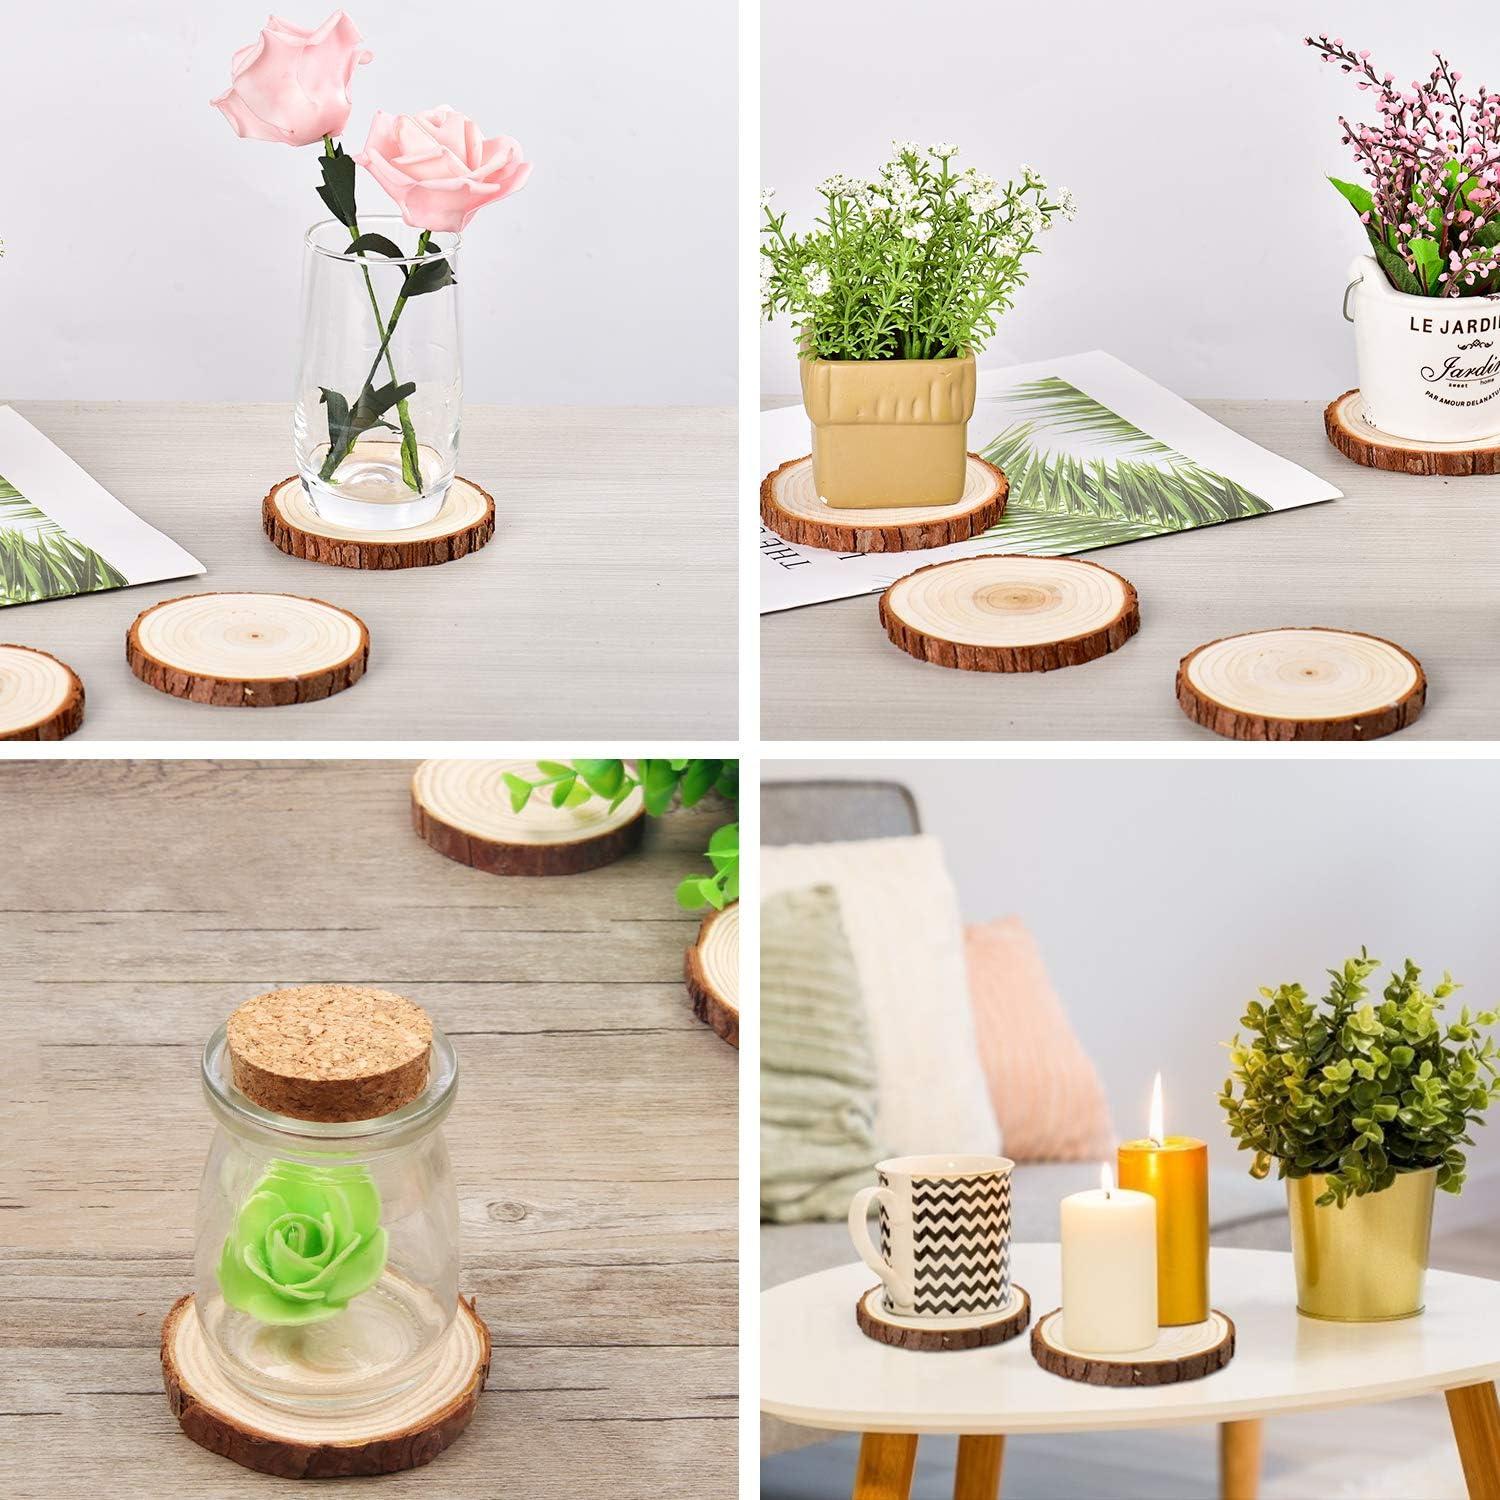 Rustic decor and wood rounds